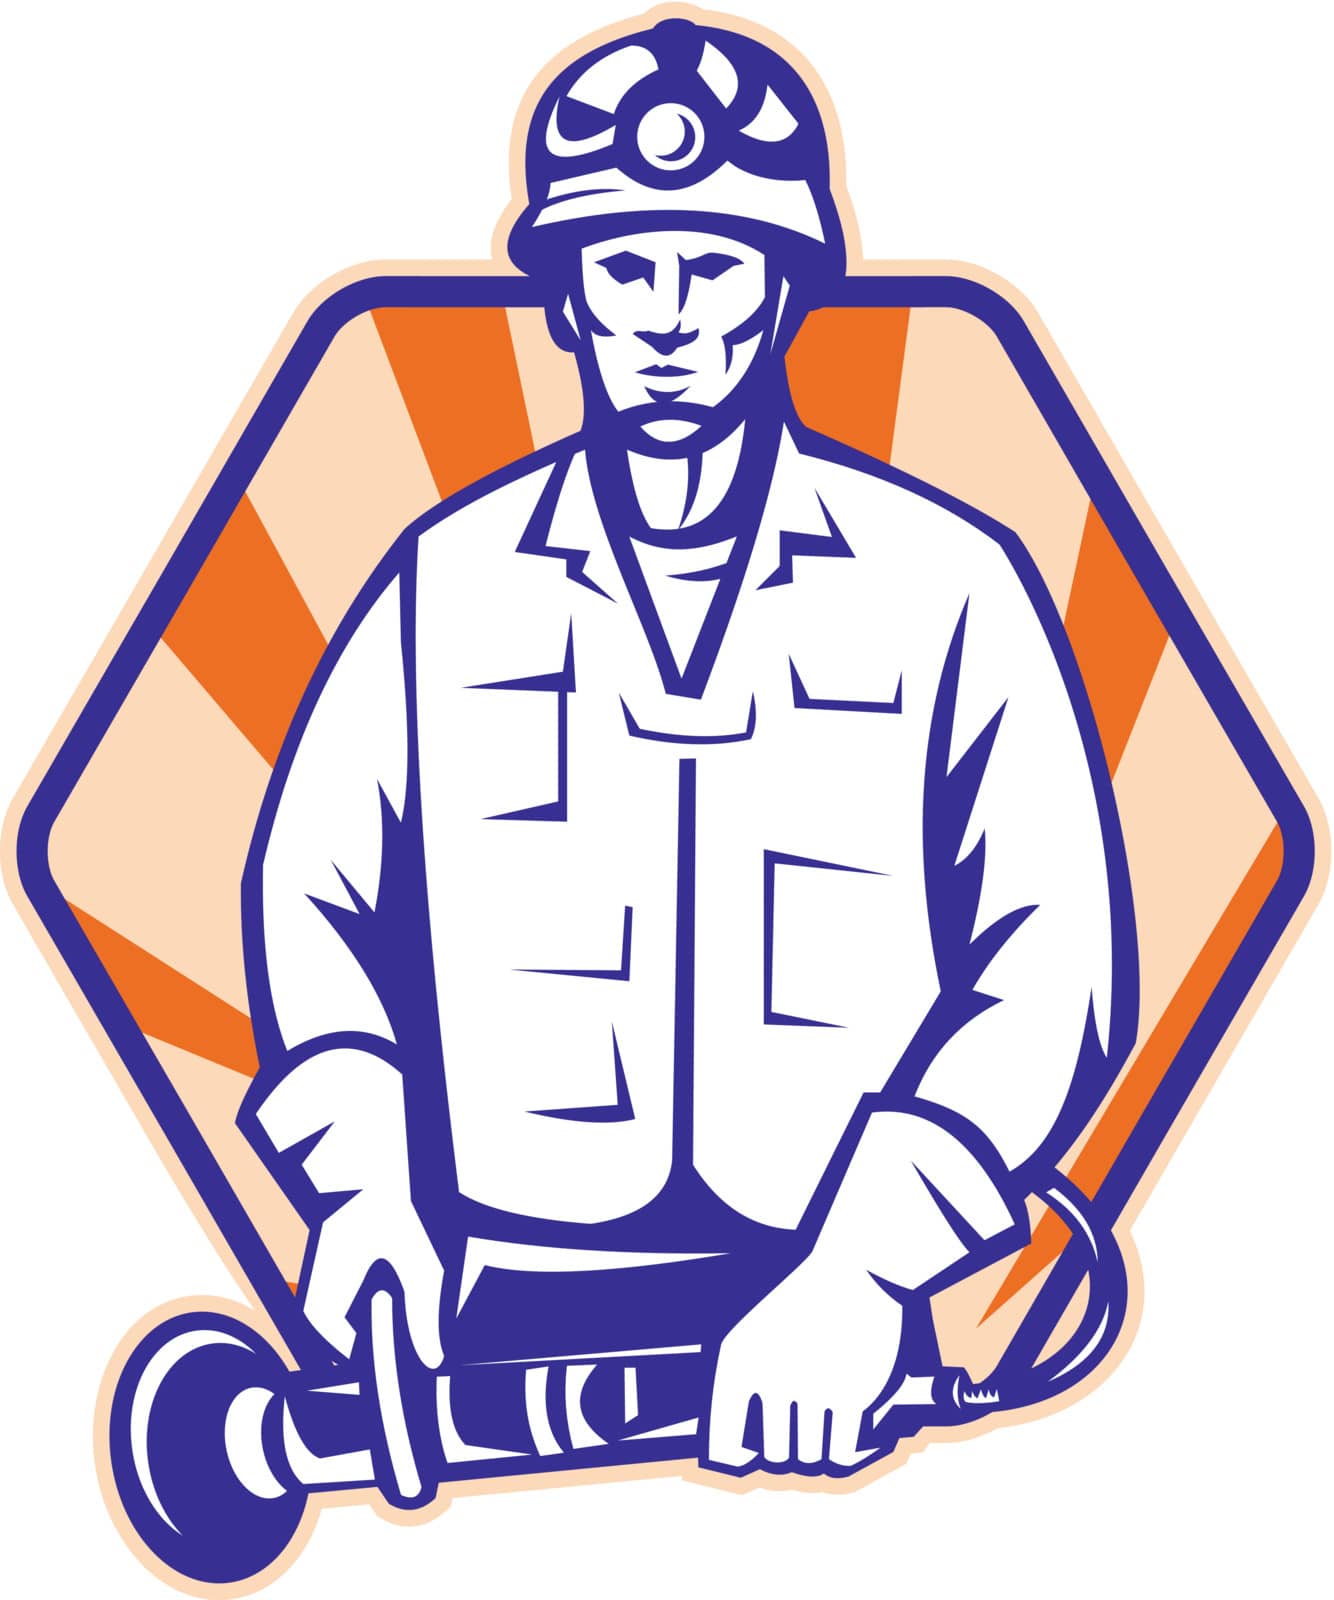 Illustration of an emergency worker holding angle grinder tool facing front done in retro woodcut style.